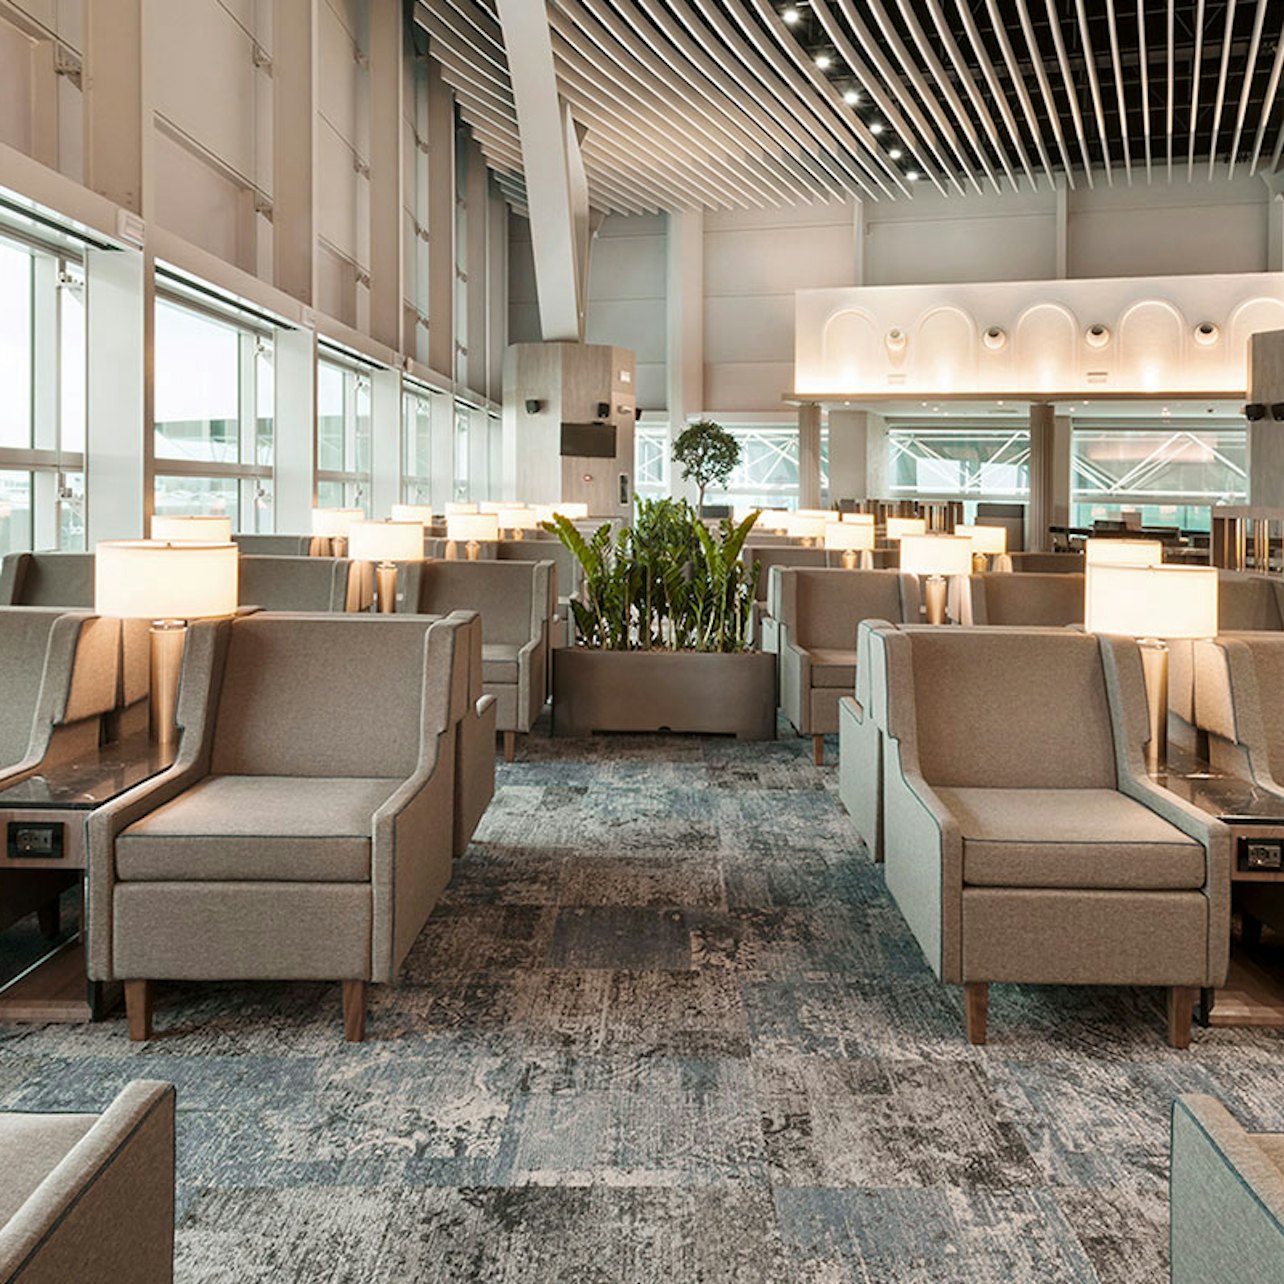 Plaza Premium Lounge at Fiumicino Airport - Accommodations in Rome